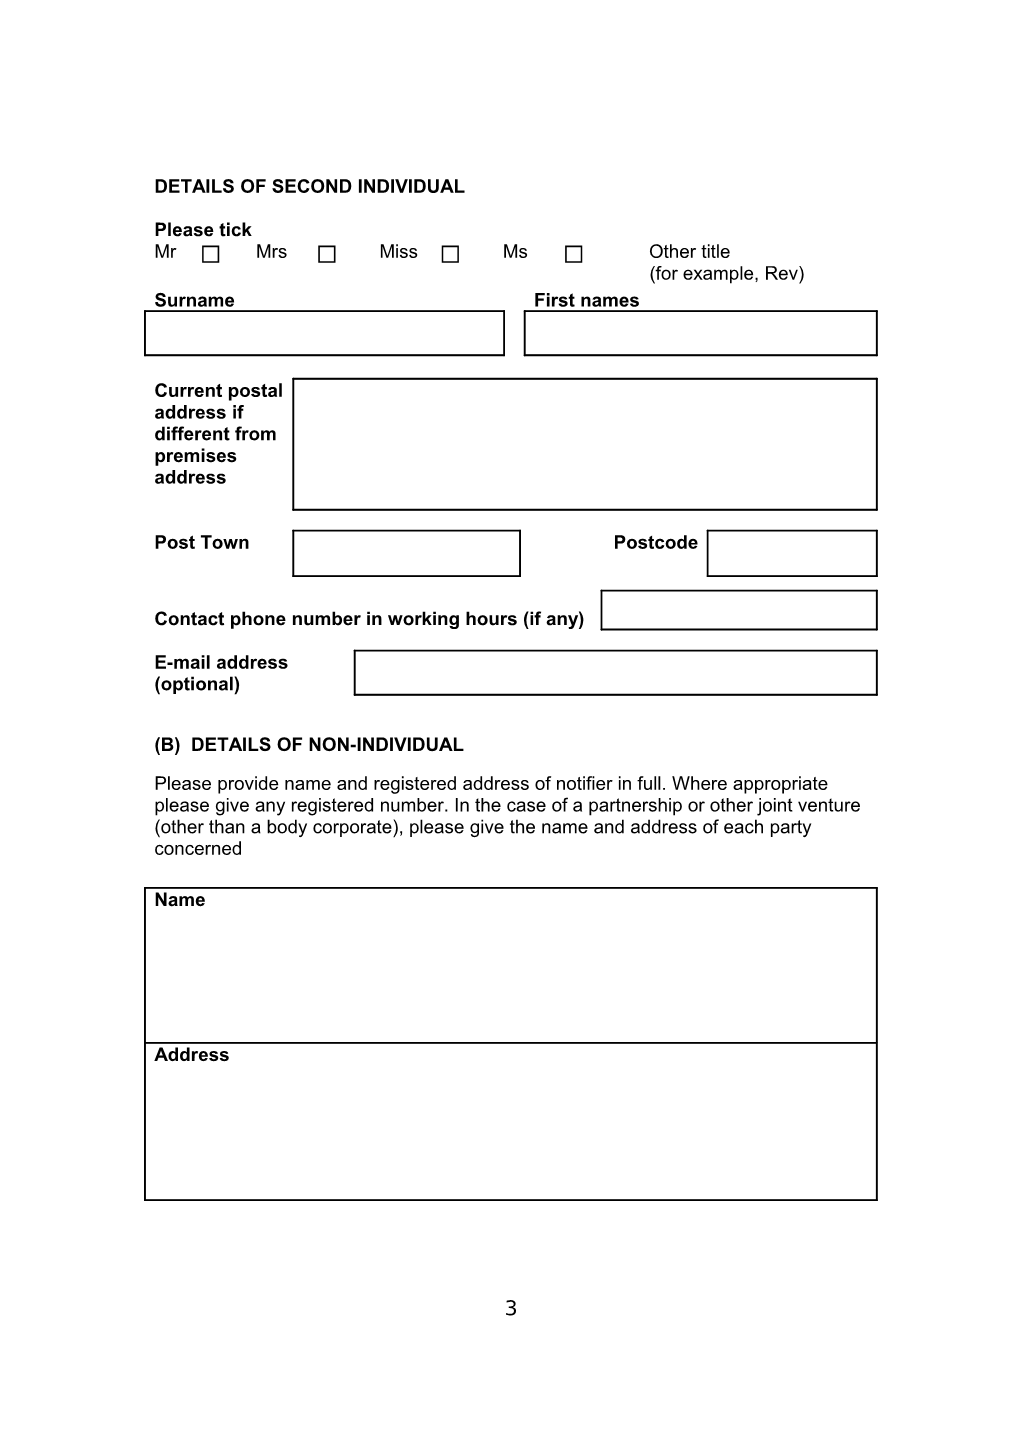 Application for a Premises Licence to Be Granted